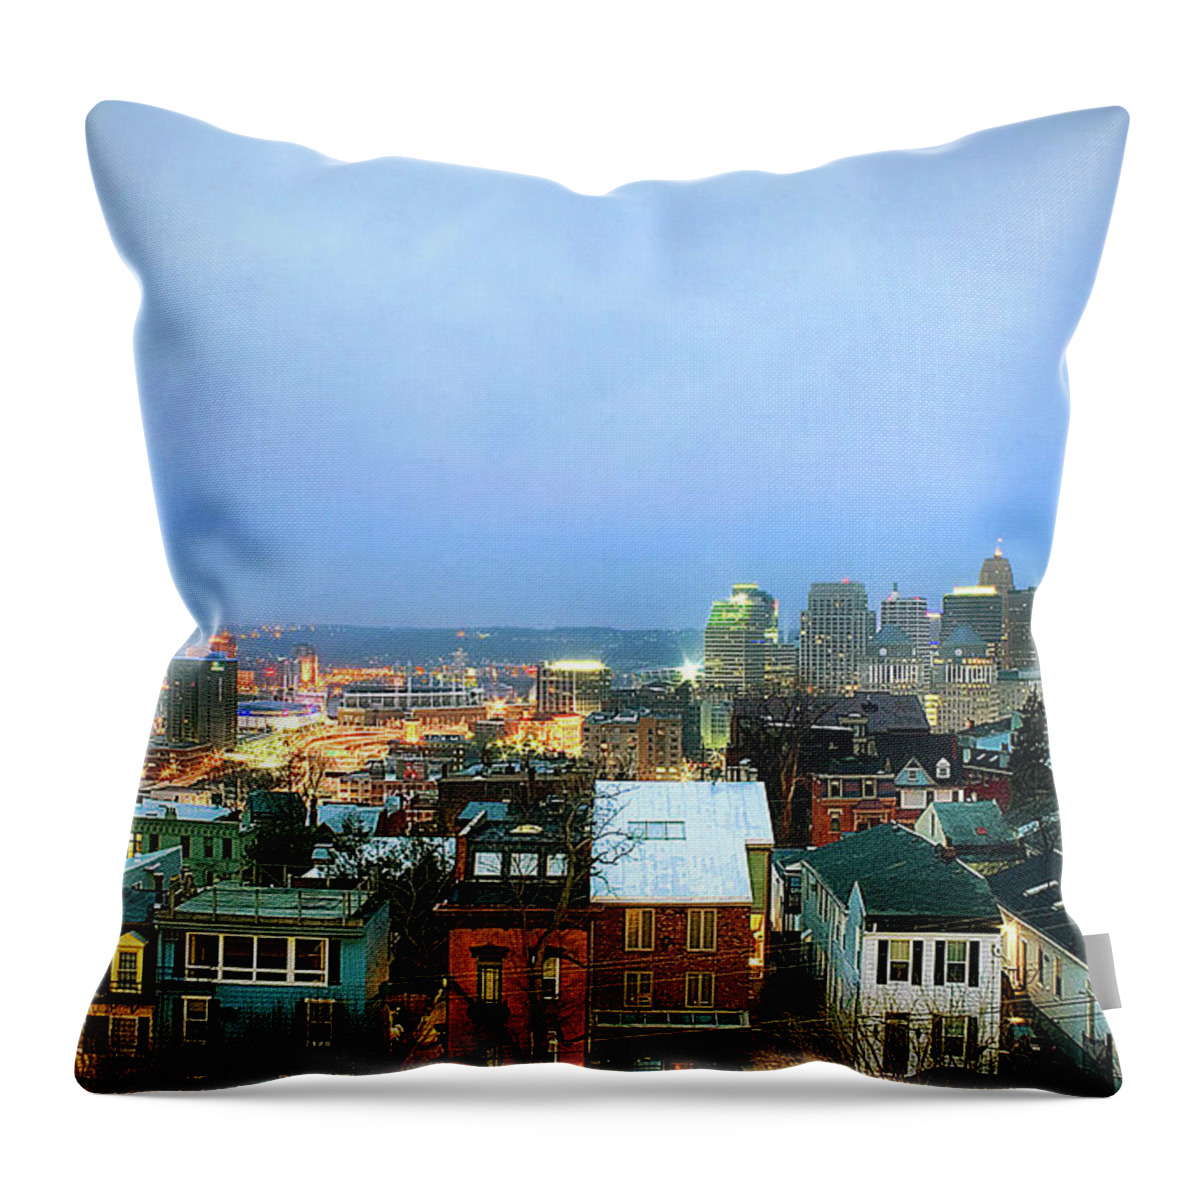 Tranquility Throw Pillow featuring the photograph Cincinnati Skyline by Keith R. Allen